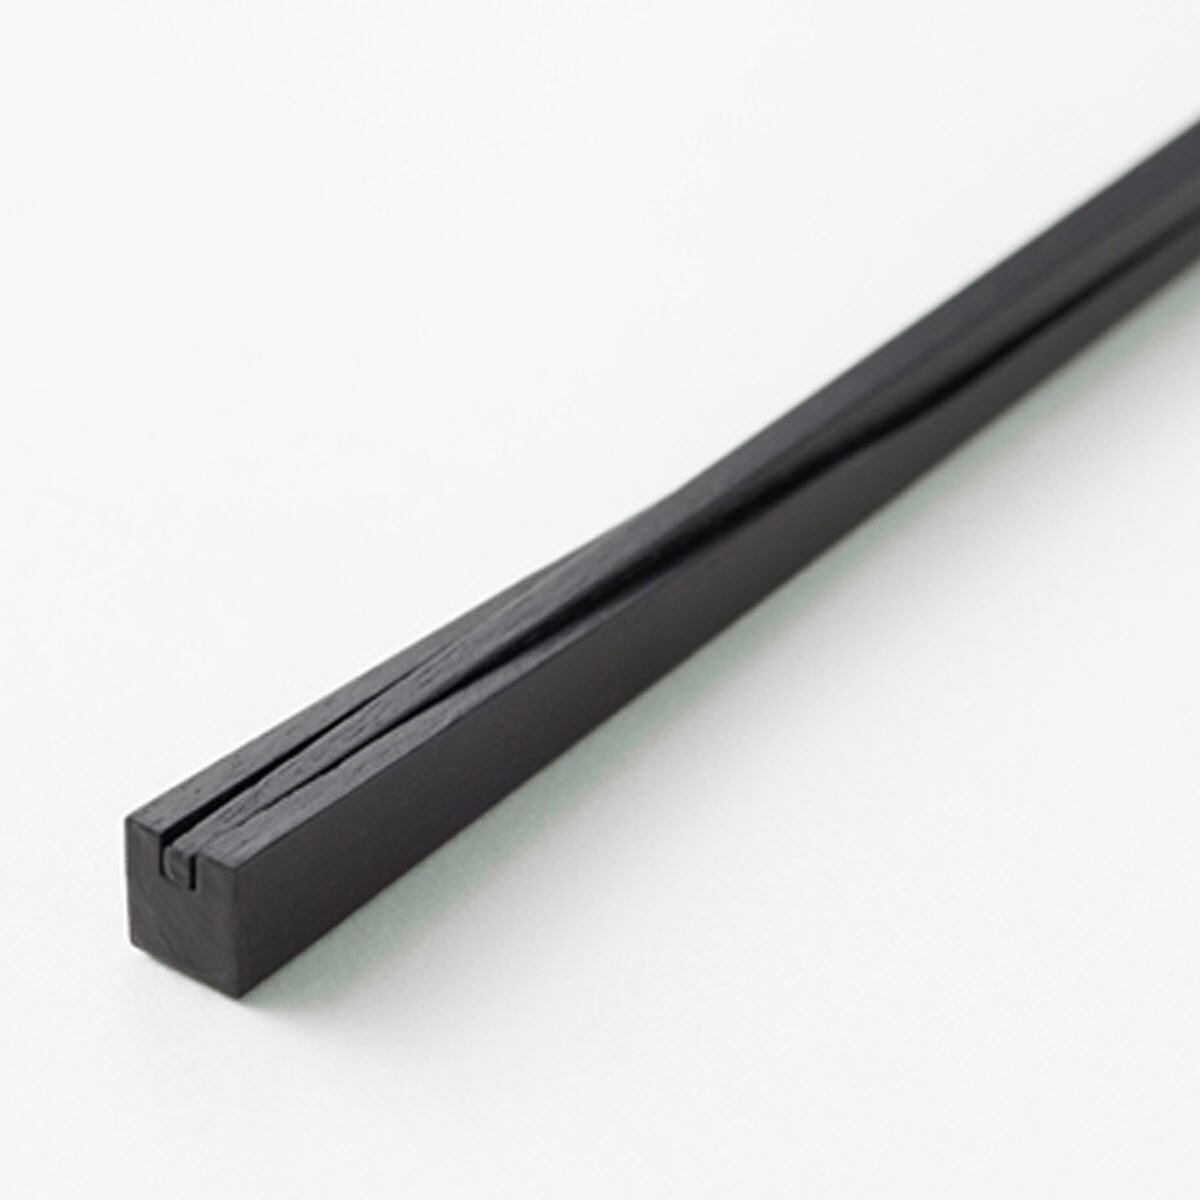 The successor to their helix-shaped &lsquo;Rassen&rsquo; chopsticks, the Kamiai chopsticks by Japanese studio Nendo offers a new self-nesting solution that includes the use of small, embedded magnets and continues the theme of conjoining the individu